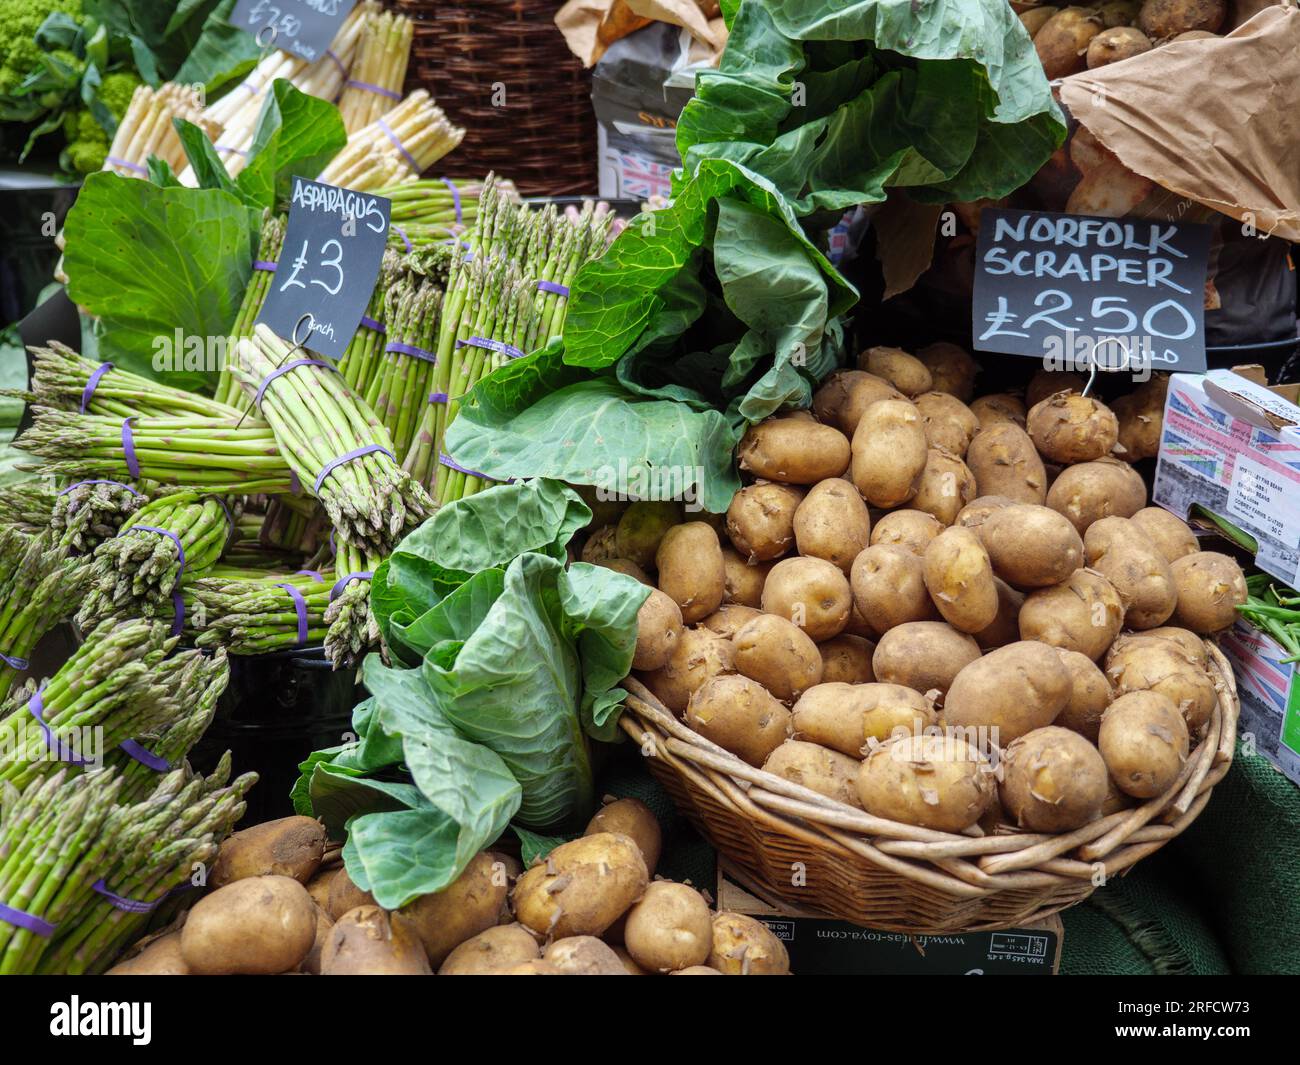 British vegetable stall selling asparagus and potatoes in Borough Market, London, UK Stock Photo